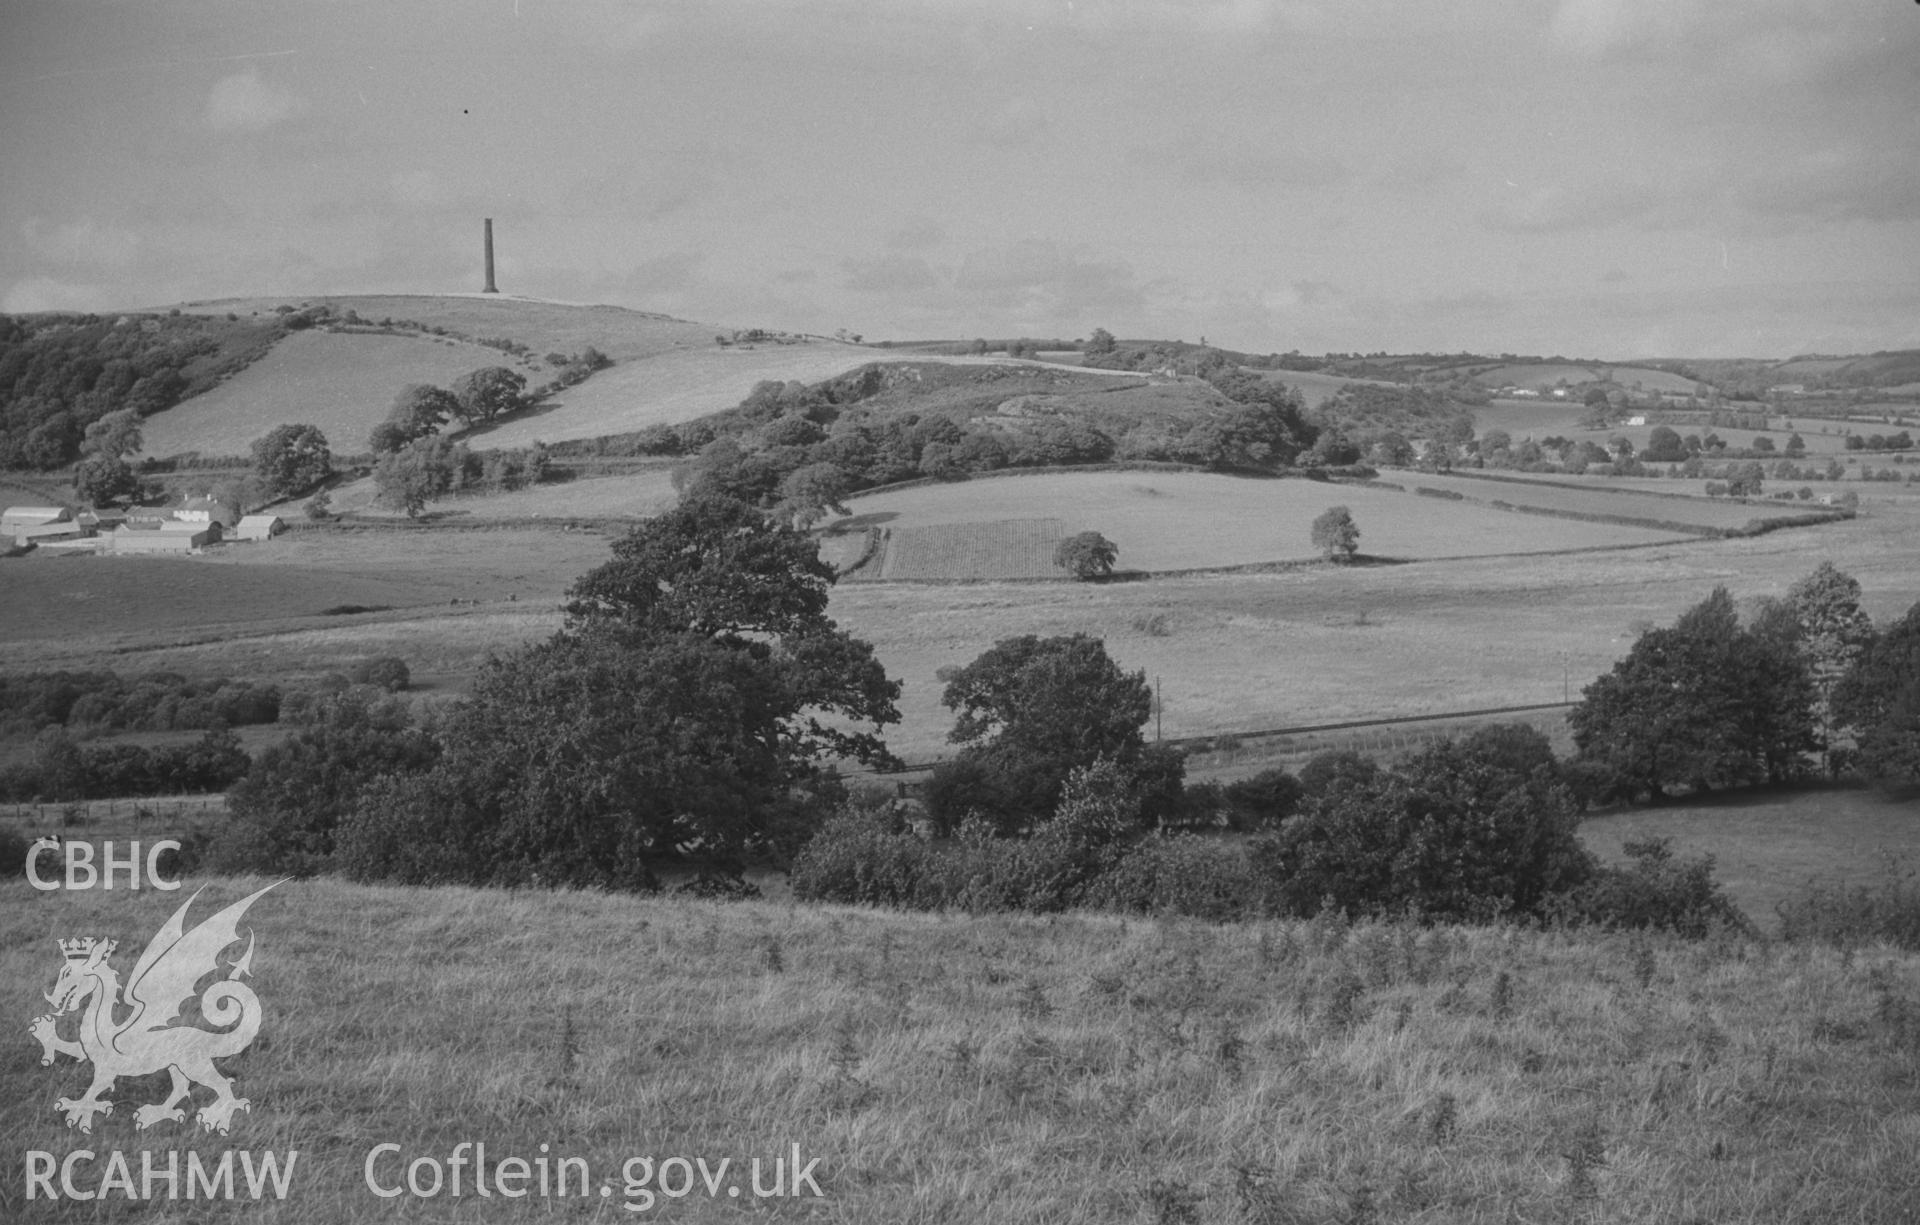 Digital copy of a black and white negative showing panoramic view of Glan Denys, Derry Ormond Monument, Dulas valley and woods by Castell Goetre. Photographed by Arthur O. Chater on 4th September 1966 from Grid Reference SN 591 505. (Photograph 3 of 6).